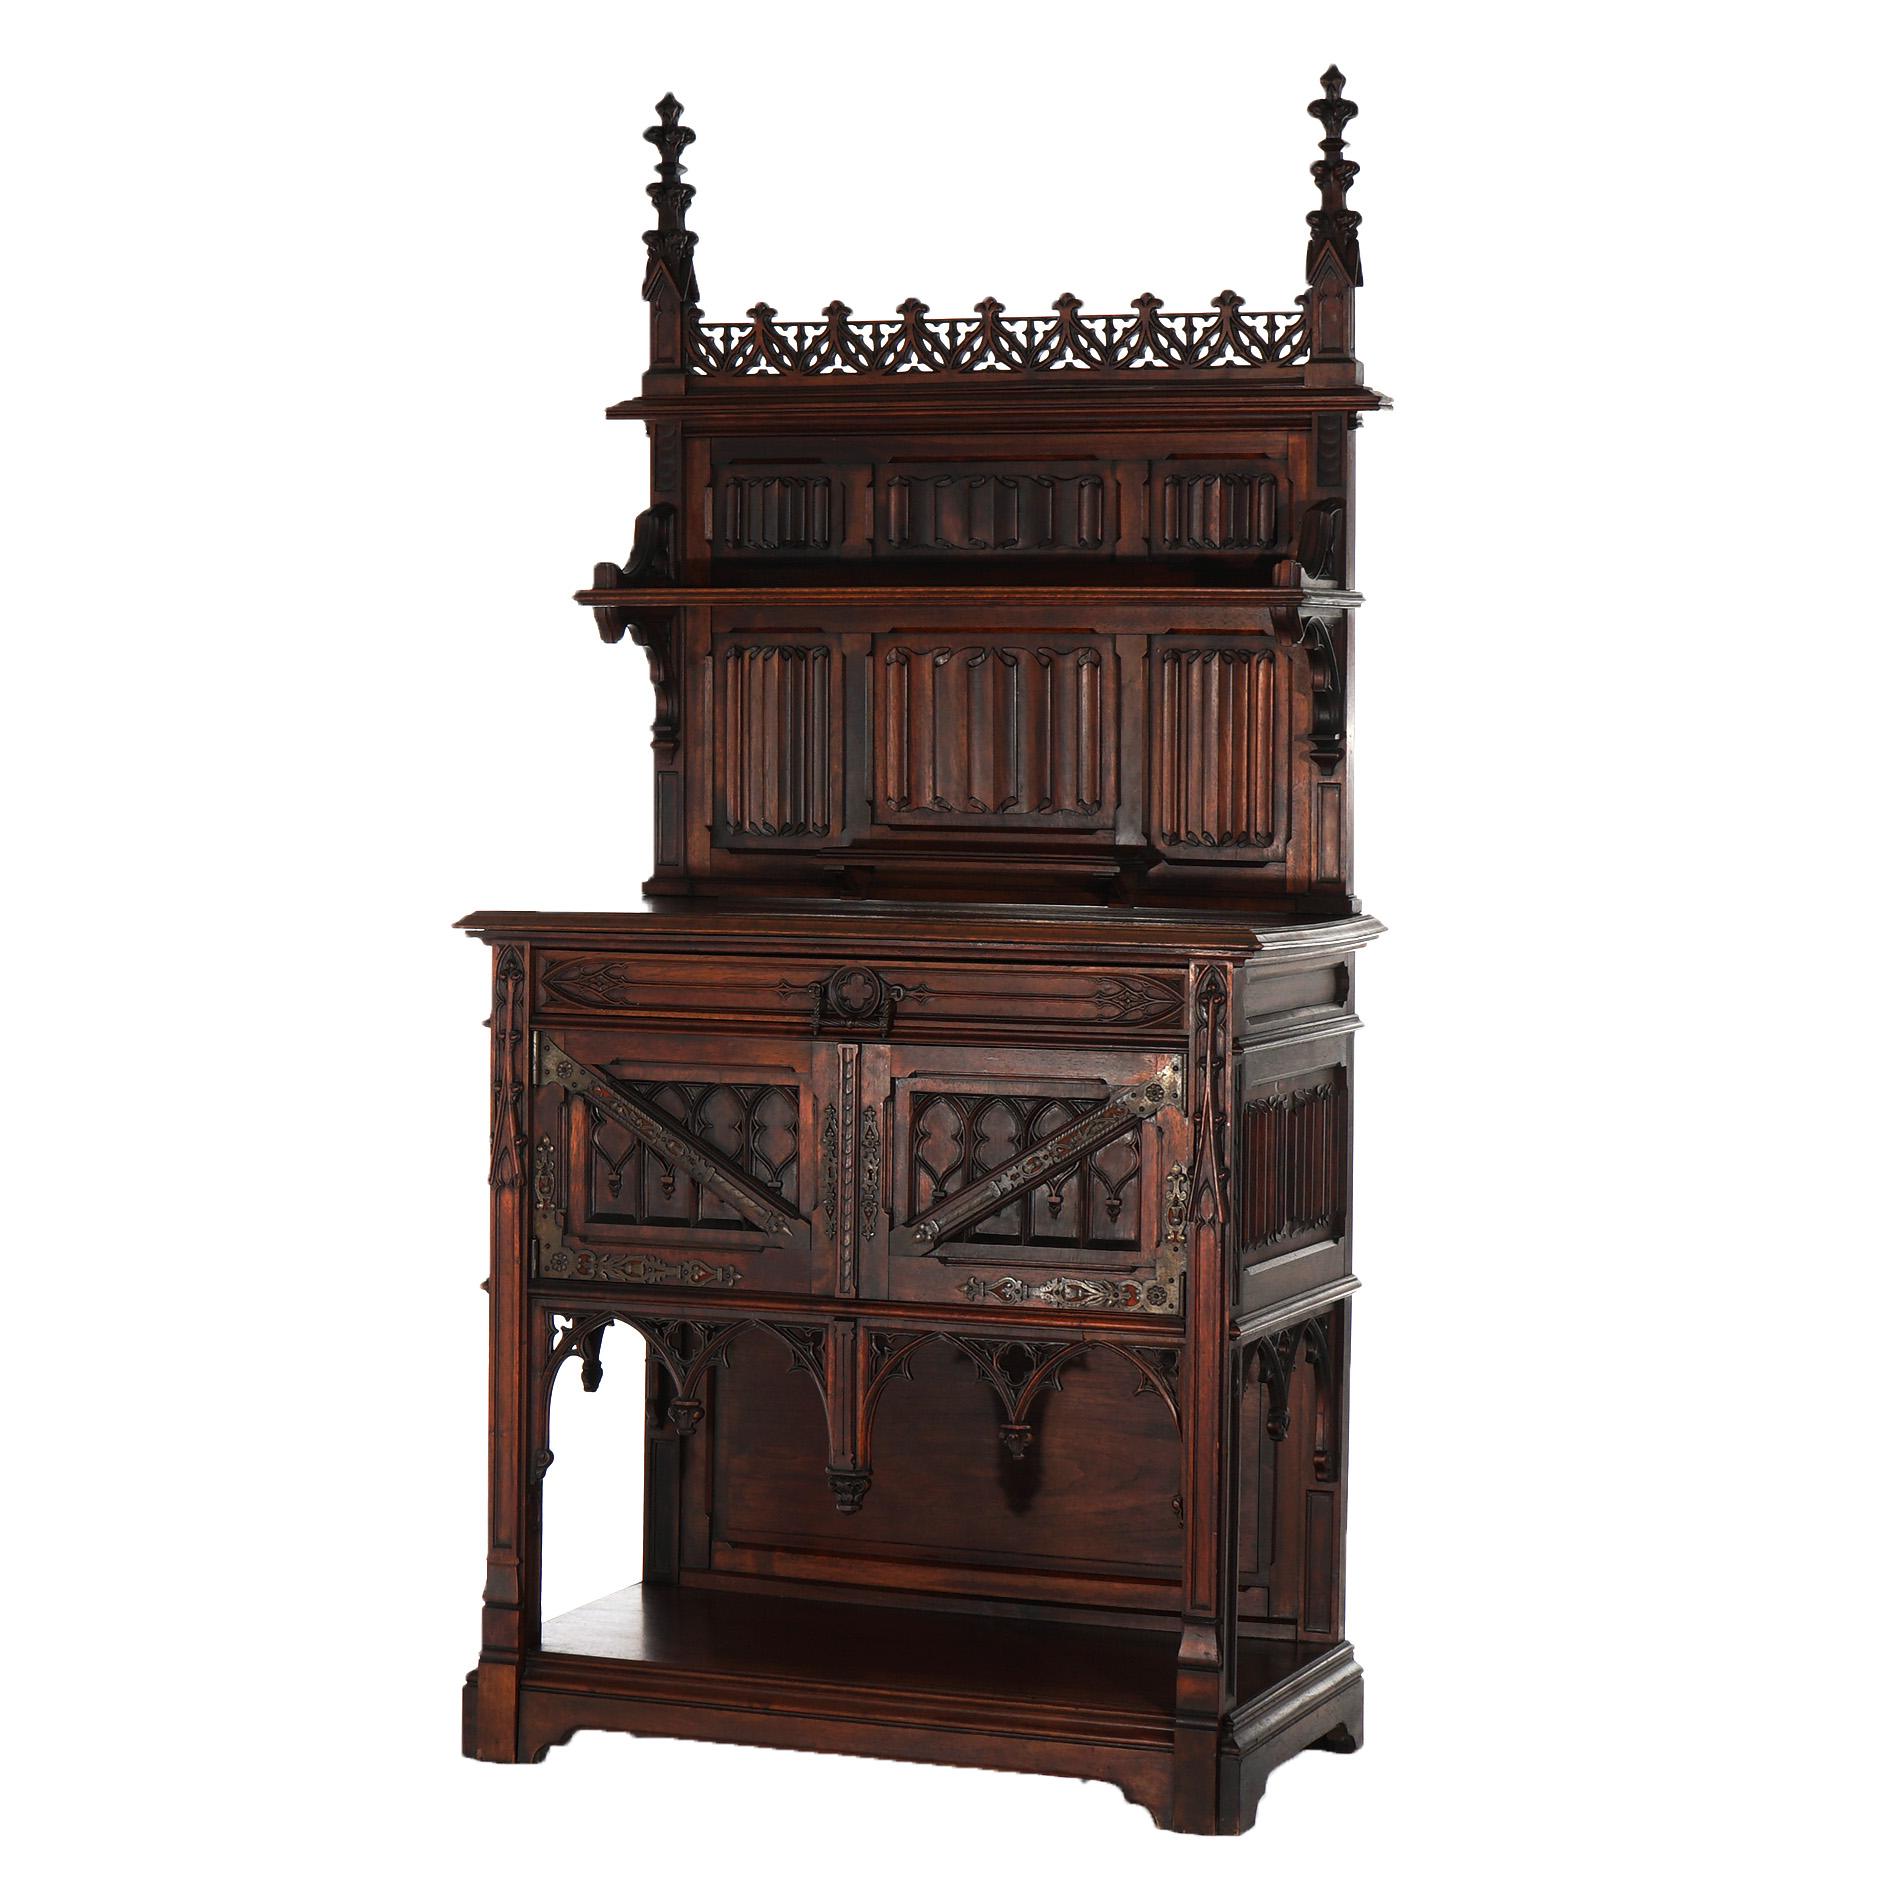 ***Ask About Reduced In-House Delivery Rates - Reliable Professional Service & Fully Insured***

Antique Gothic Revival Carved Walnut Server with Cathedral Arch and Scroll Elements, C1860

Measures - 79